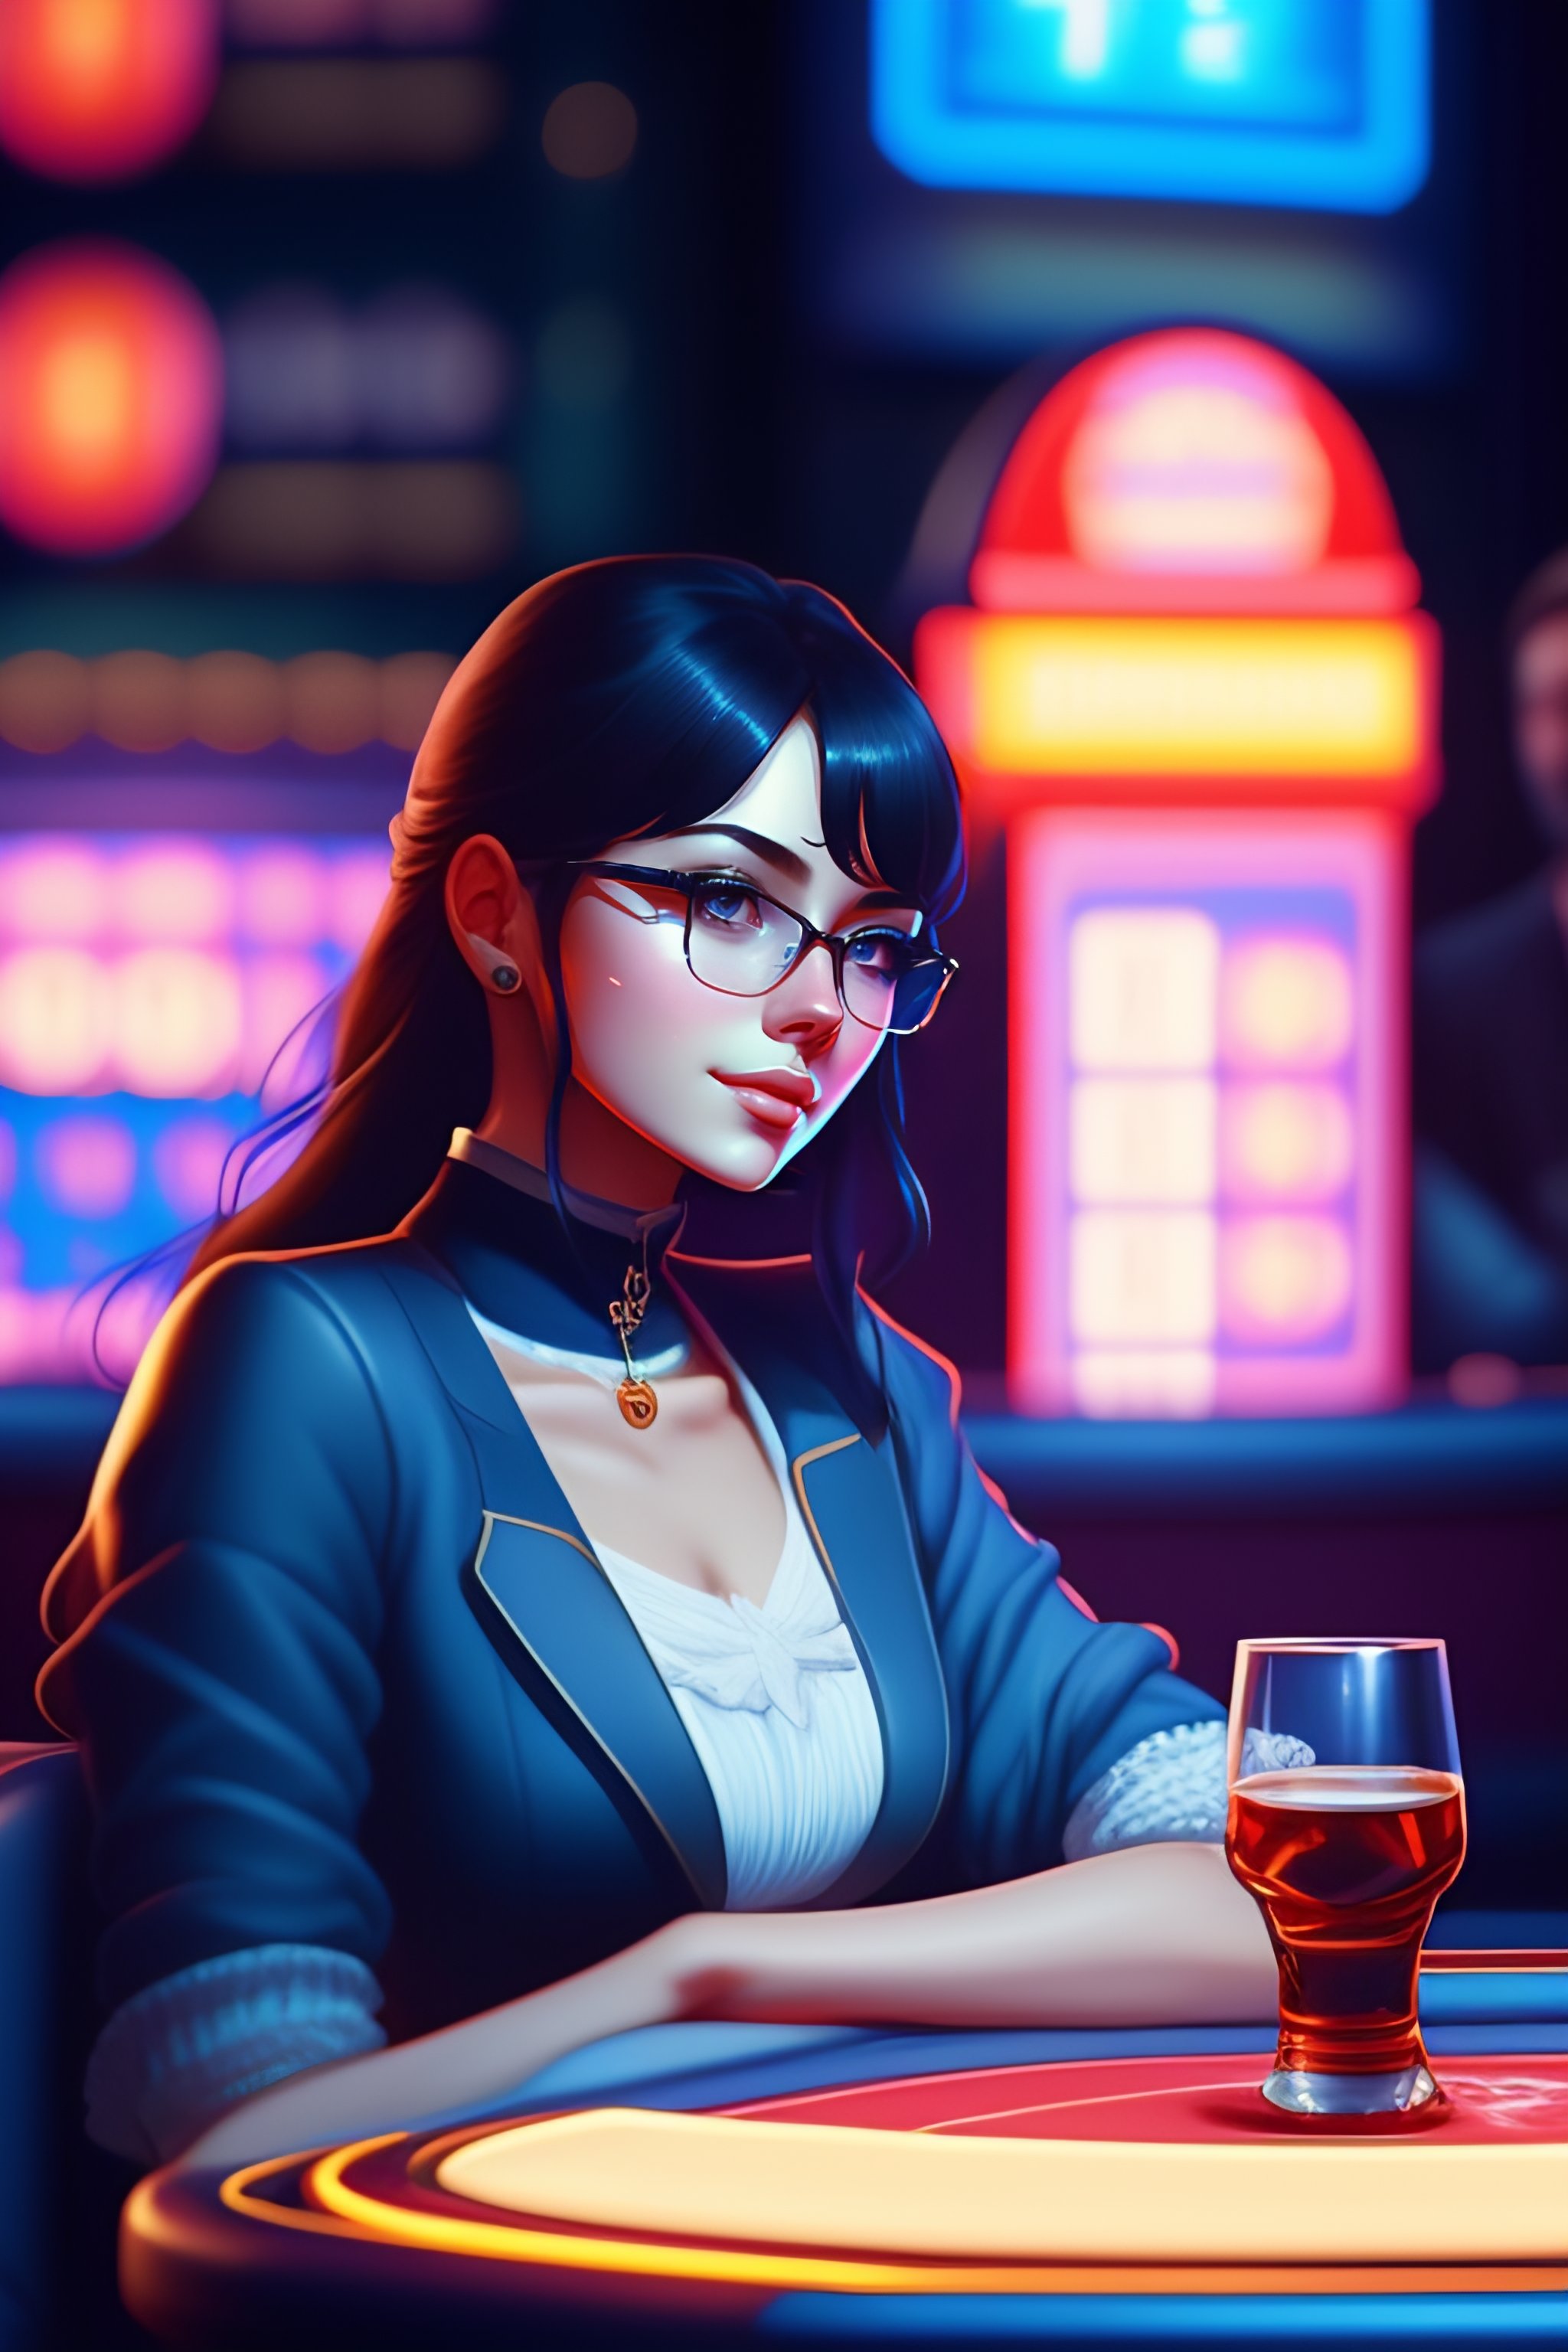 Lexica - Cute glasses tonic background by c drinking a black blue sweater hair gin wayfarer a casino black inside girl with table sitting in poker